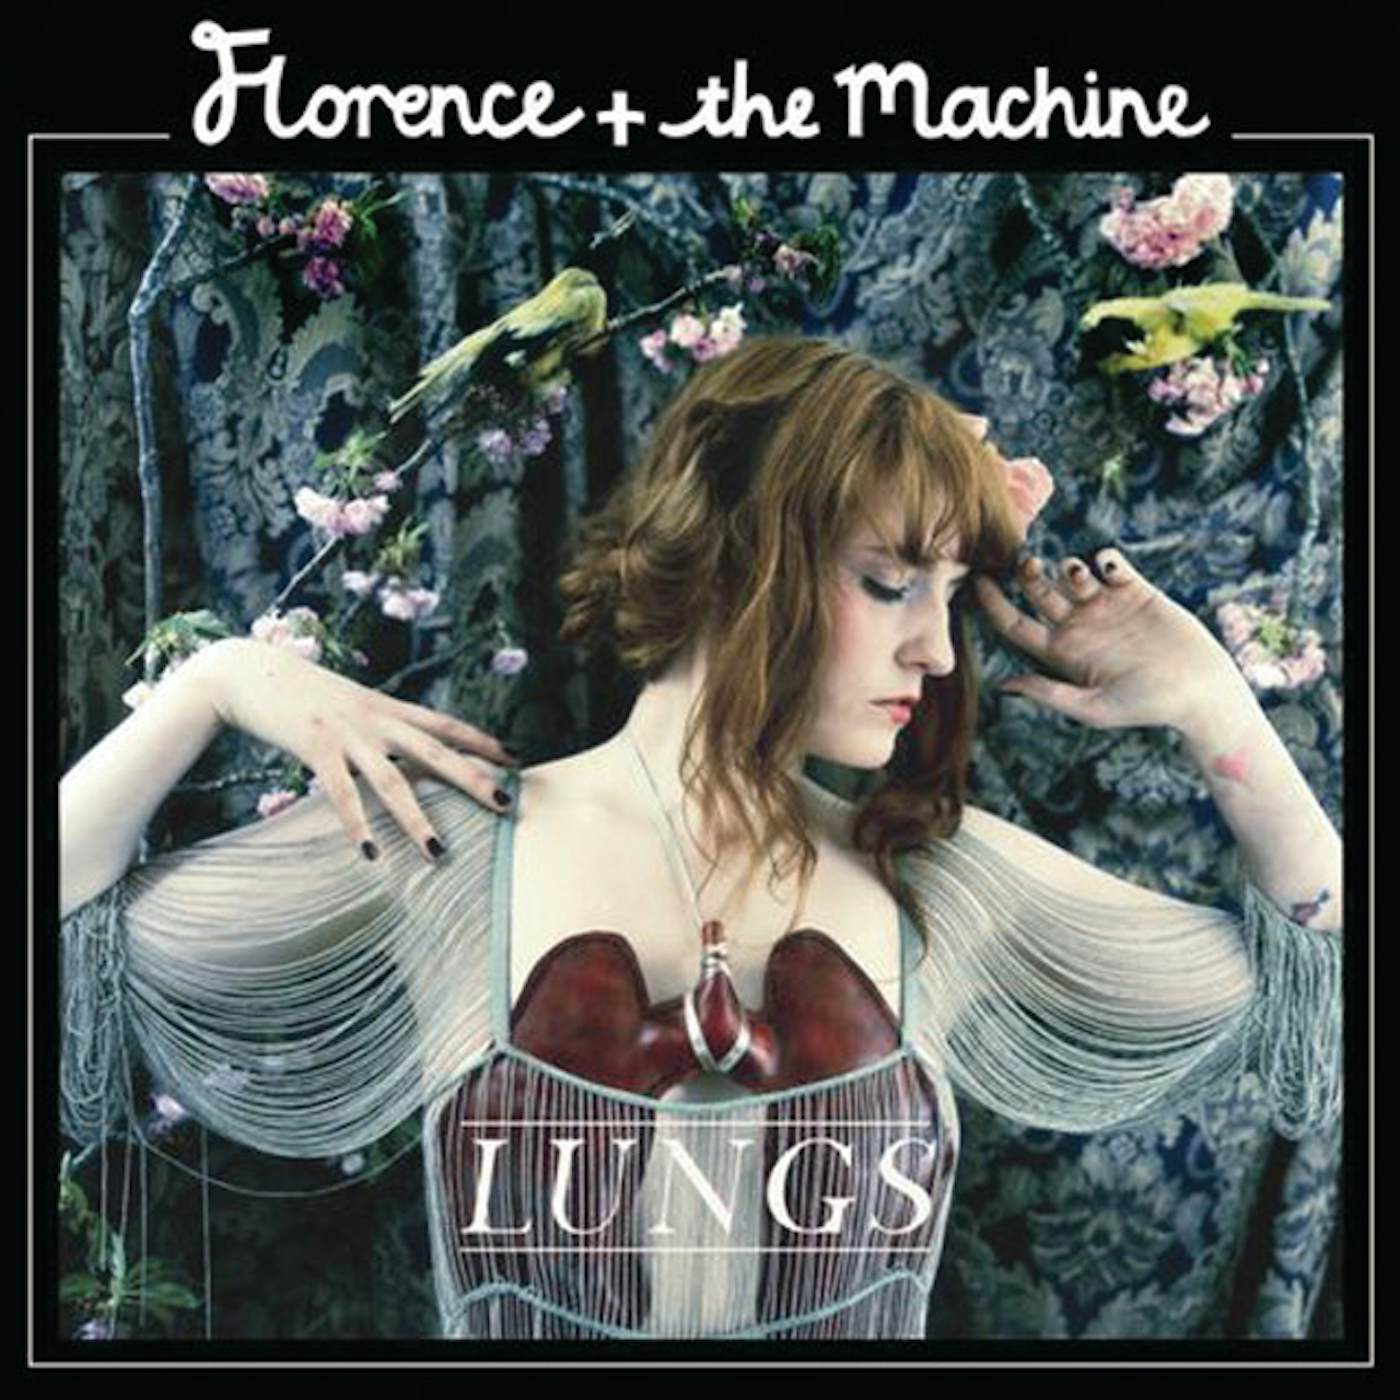 Florence + The Machine Lungs (Red) Vinyl Record